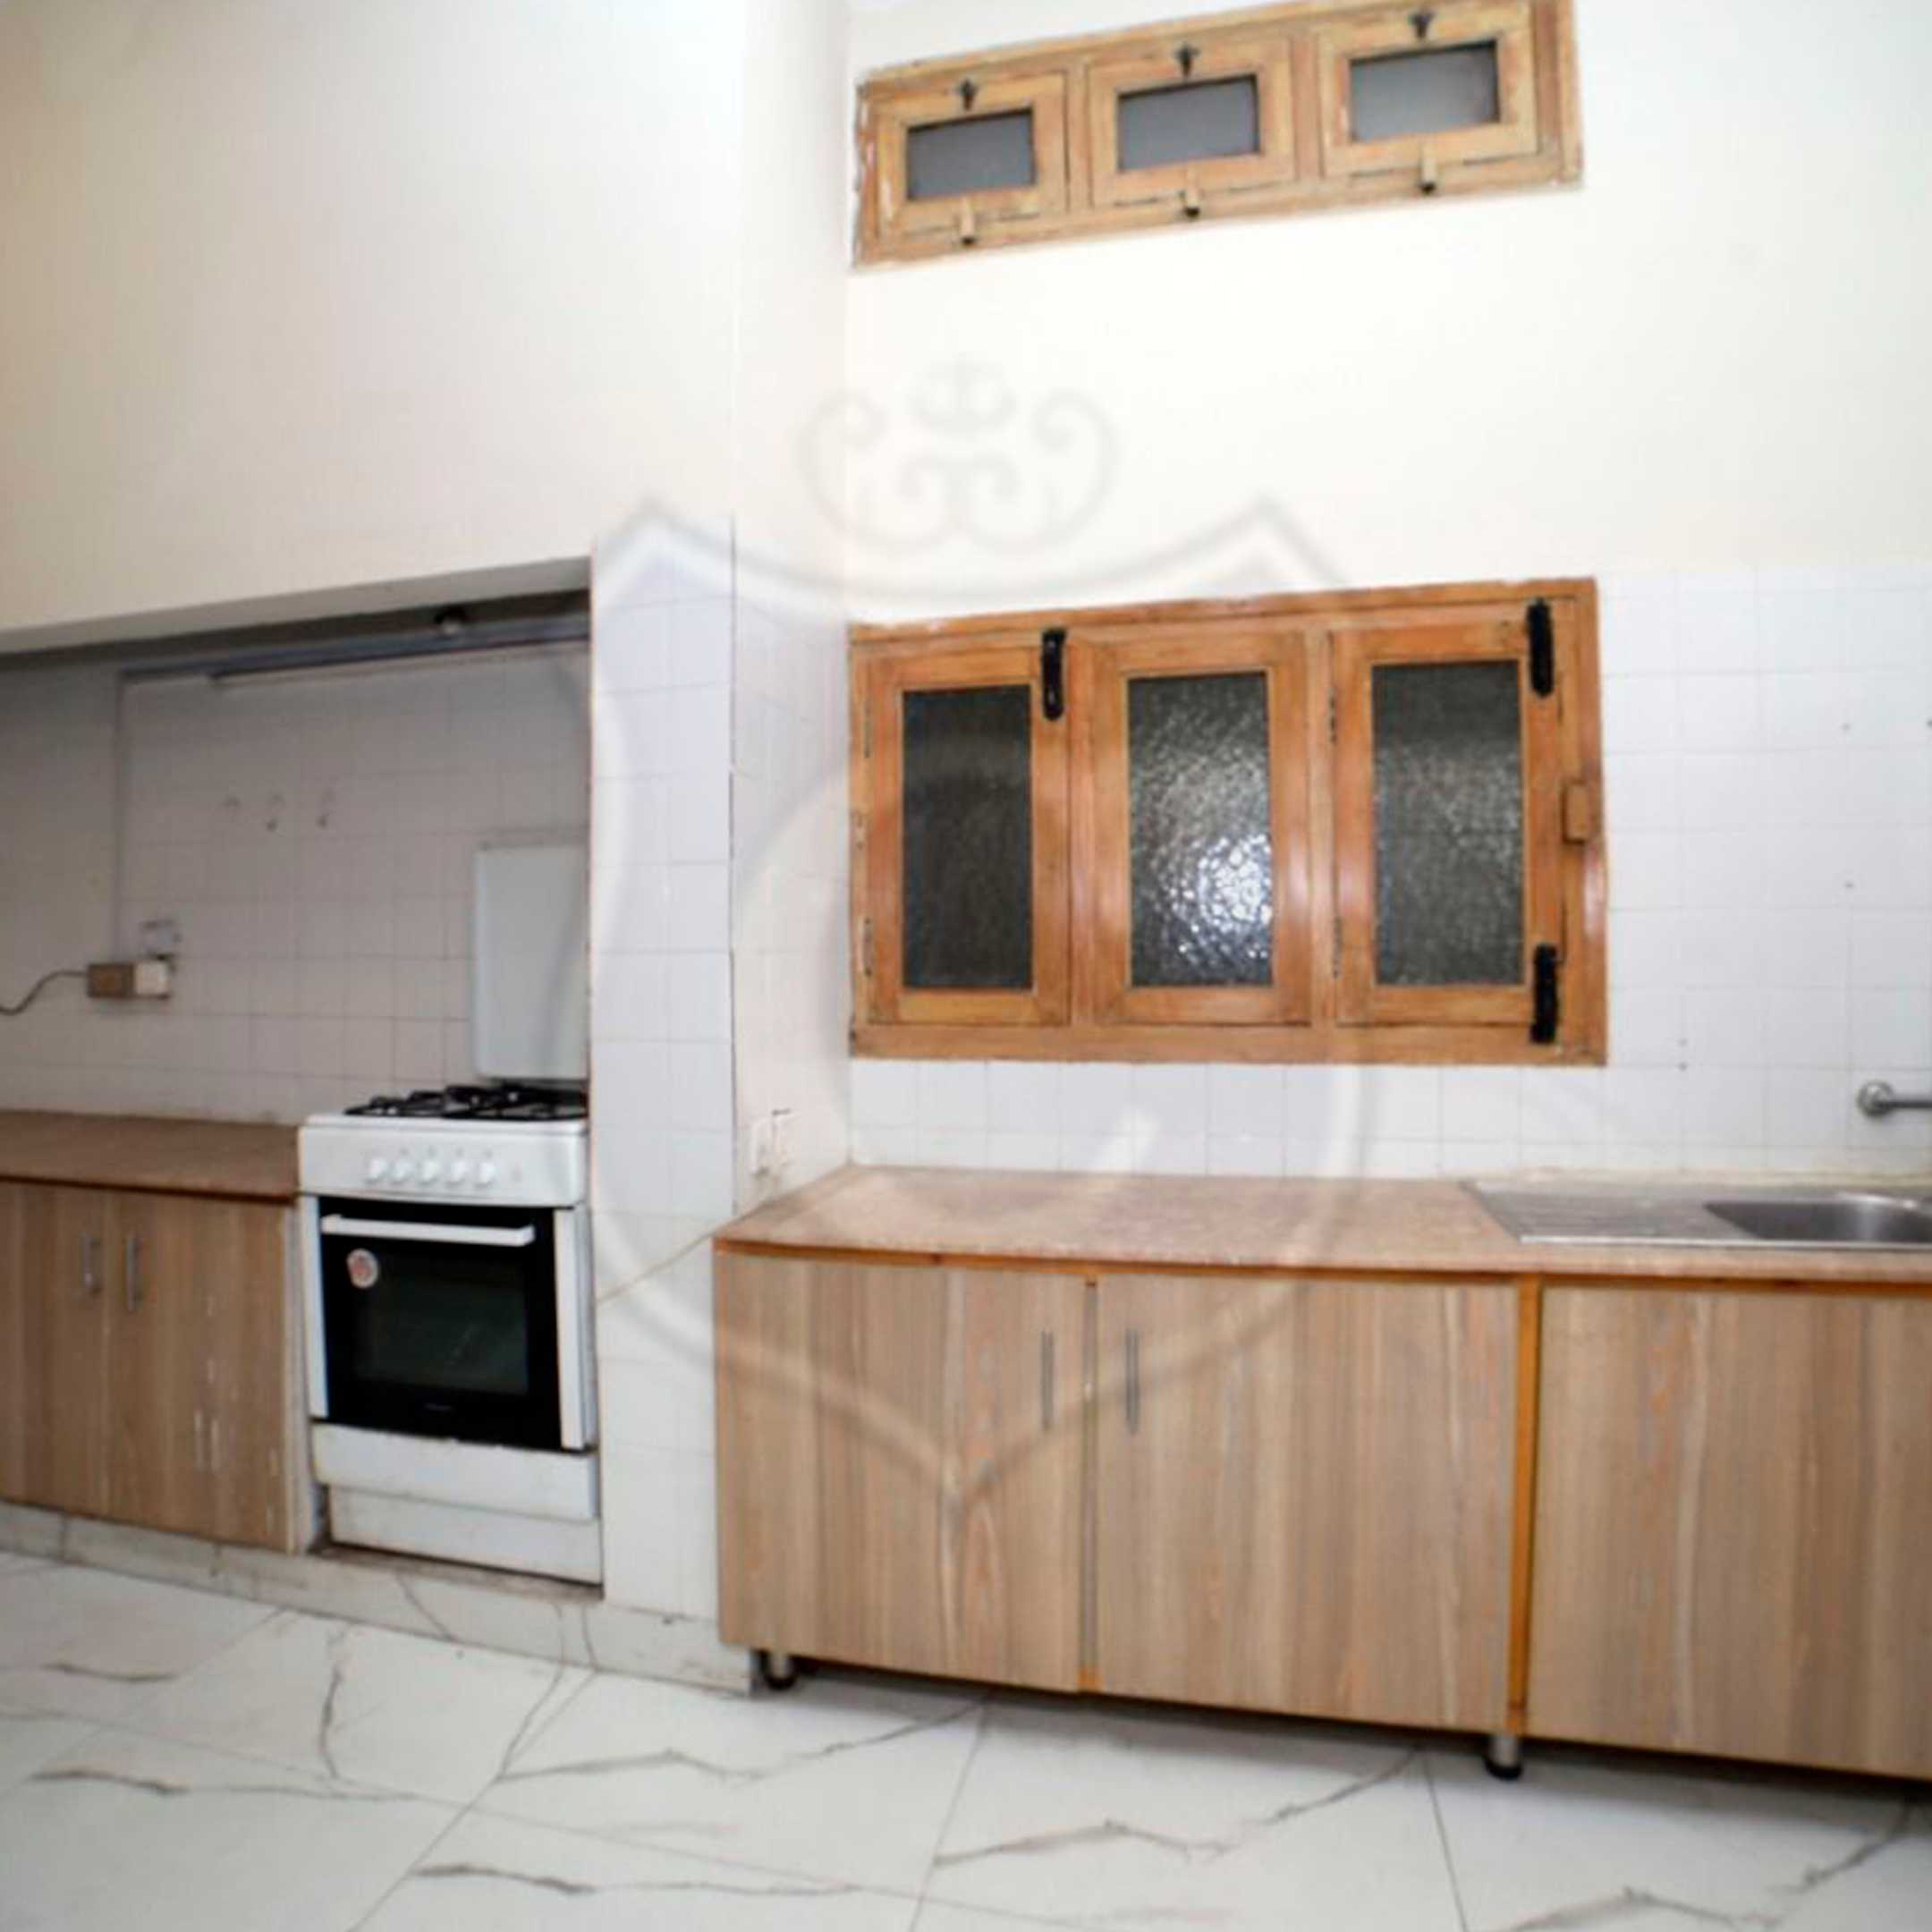 1 Kanal Single Story House for Rent in Main Cantt.